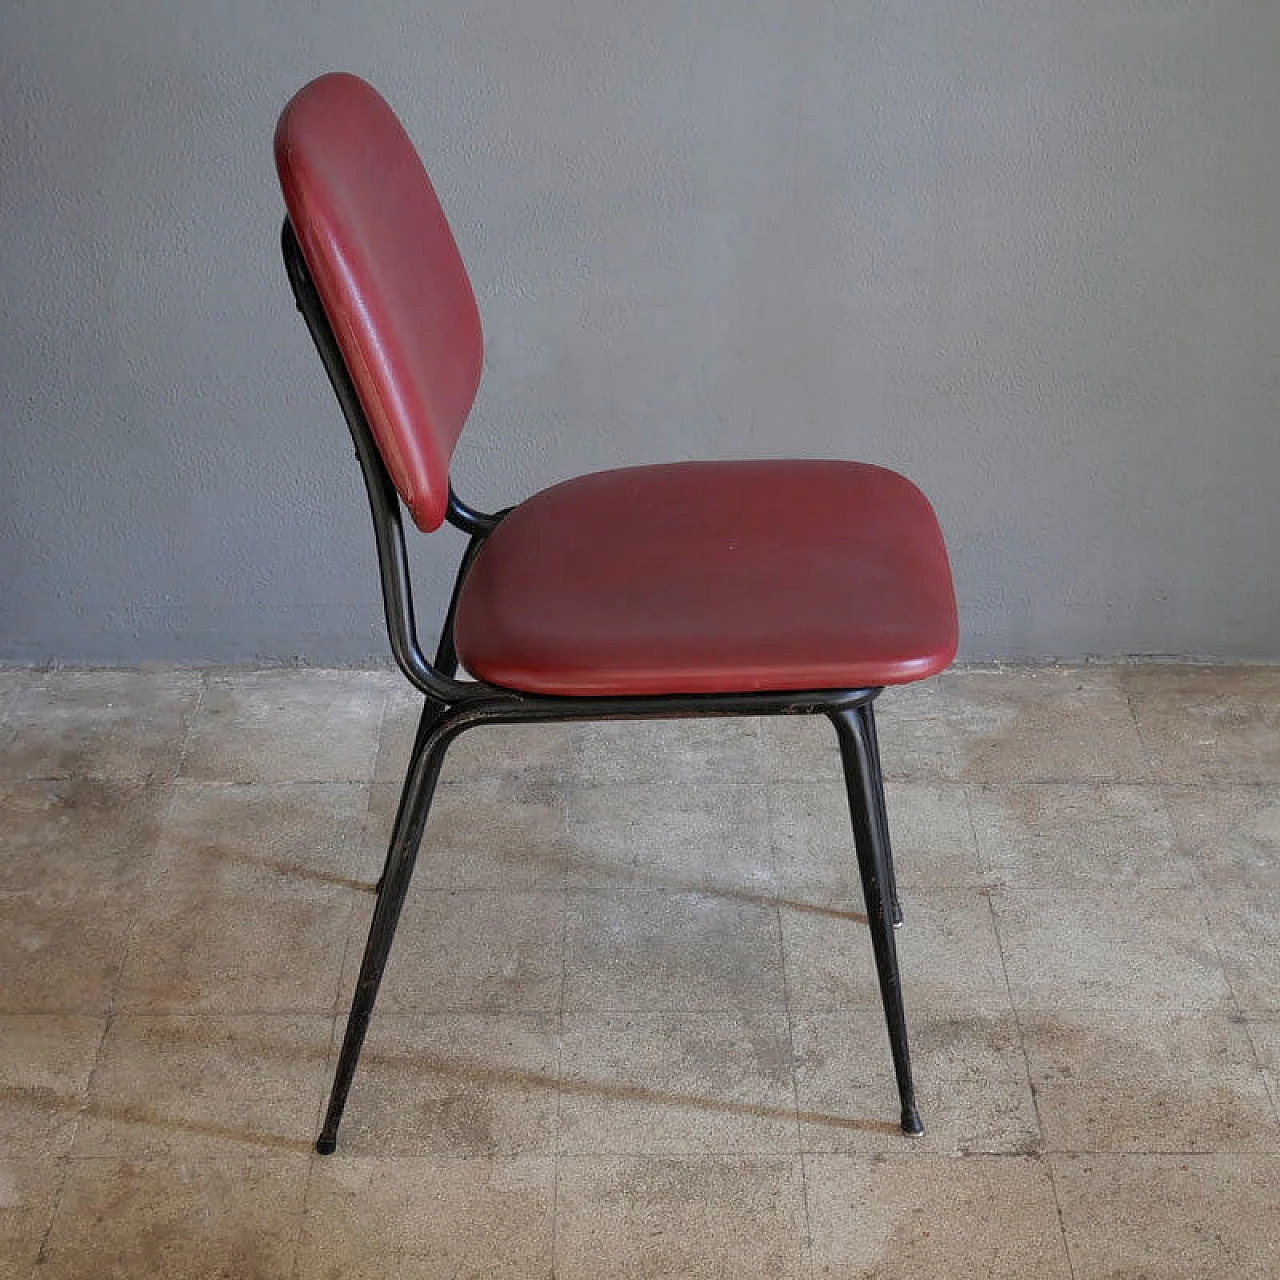 Theatre chairs from the 60s, eco-leather seat 2